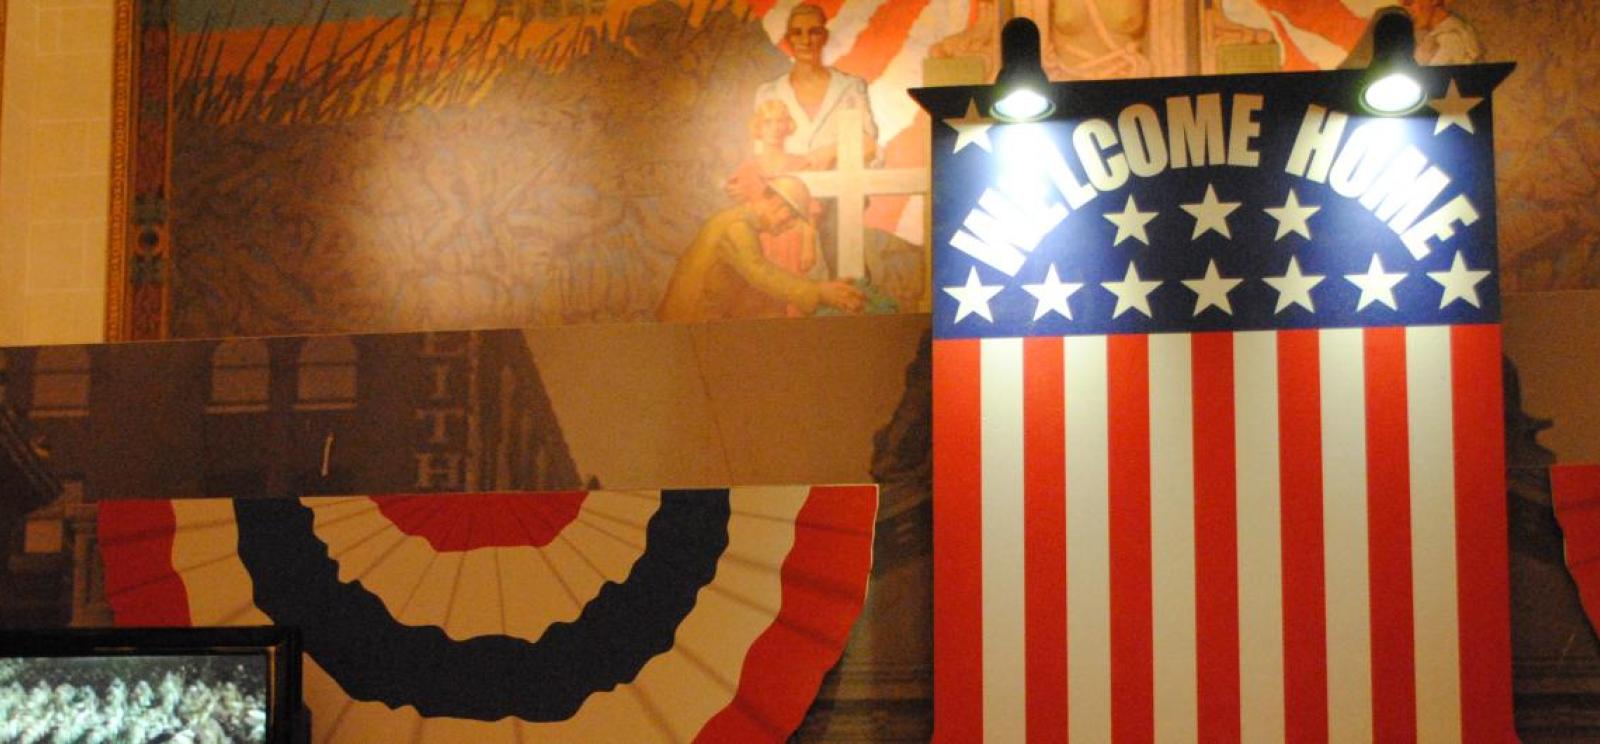 Photograph of a museum display of a signboard done up like the US flag and with the words "Welcome Home."